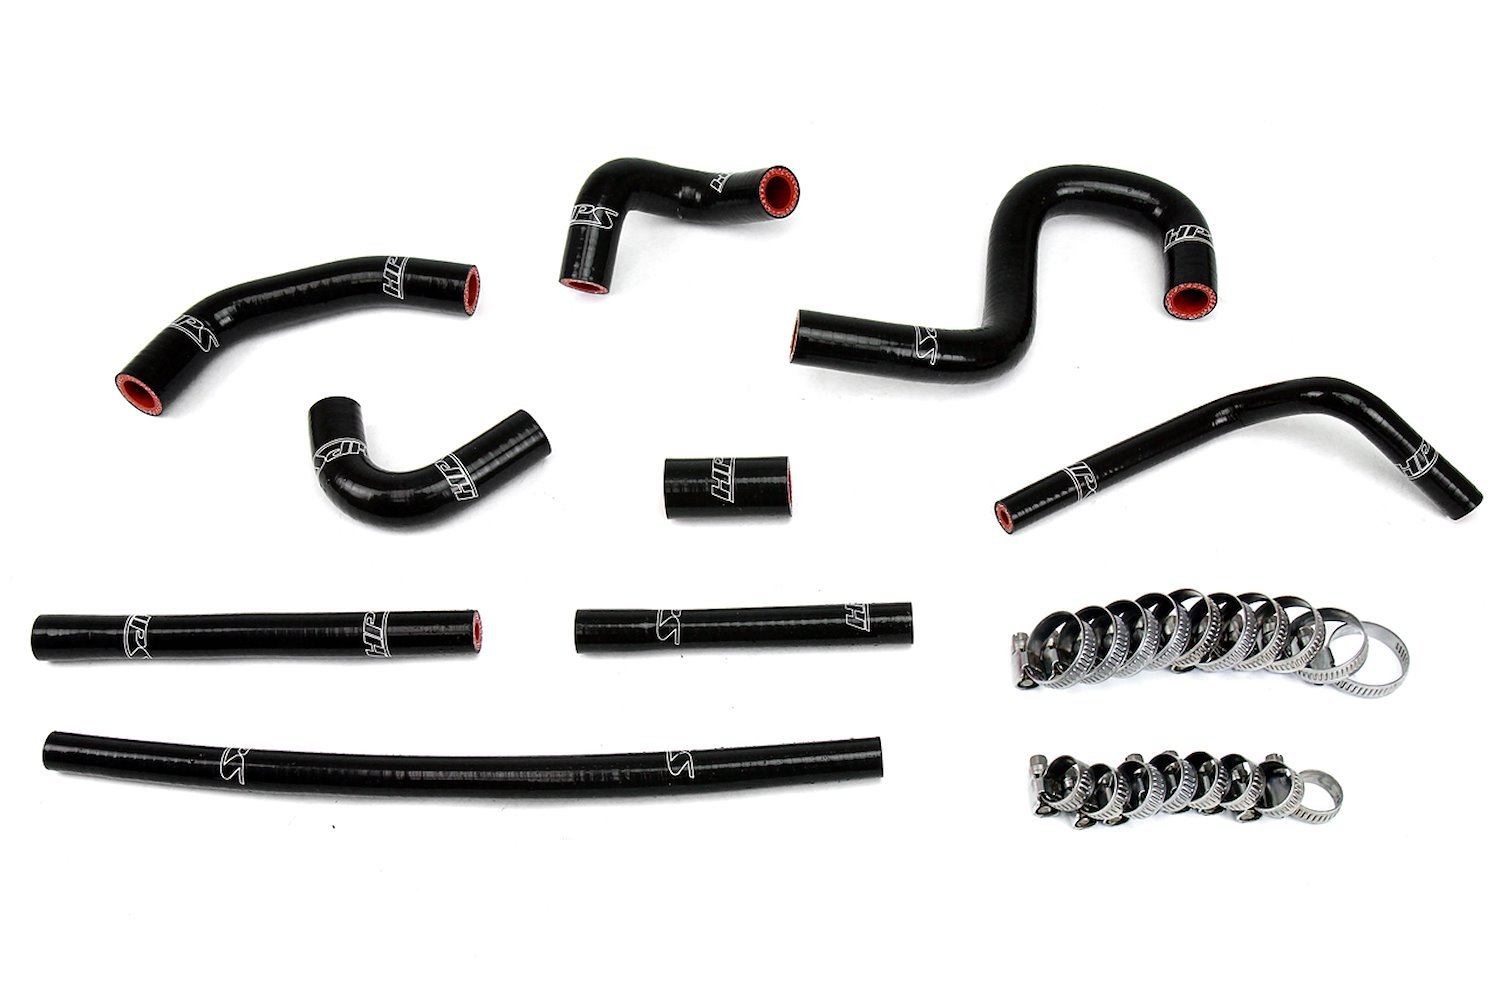 57-1798-BLK Heater Hose Kit, High-Temp 3-Ply Reinforced Silicone, Replace OEM Rubber Heater Coolant Hoses